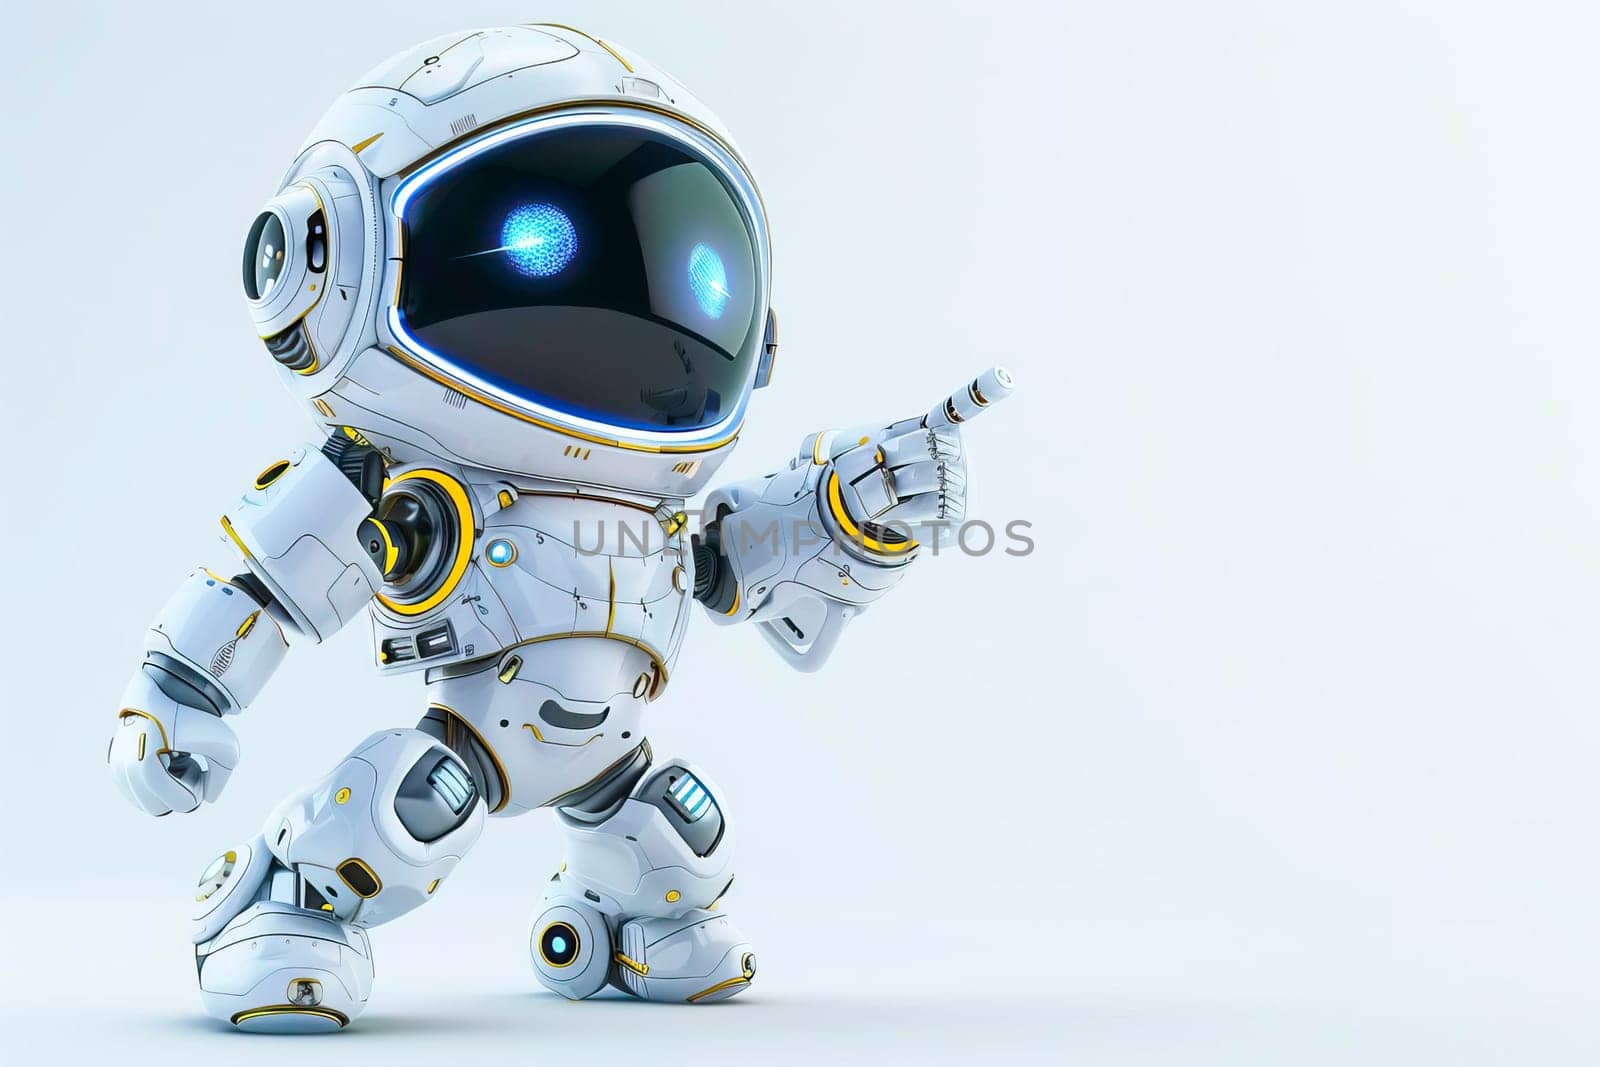 A white robot in action, pointing at something with a sleek design and futuristic appearance. by vladimka